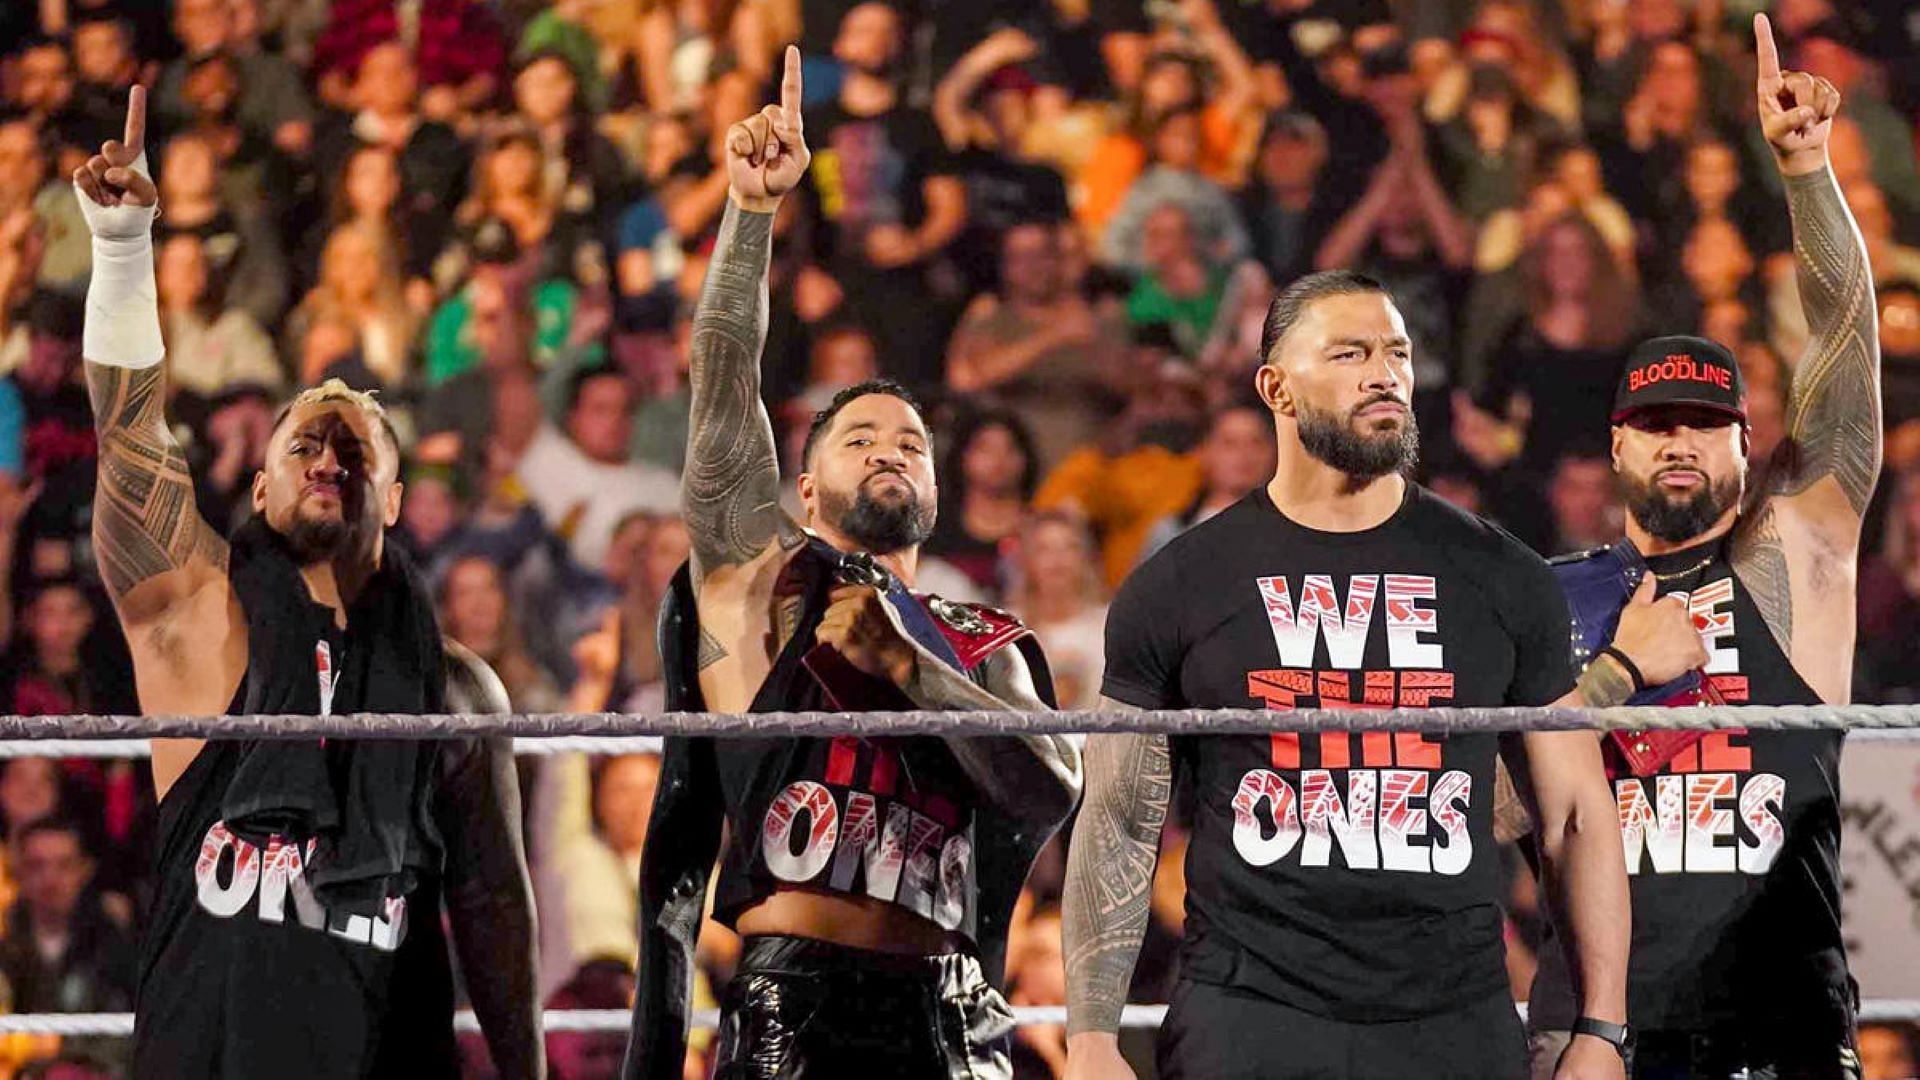 The New Day and The Bloodline were not on the same page